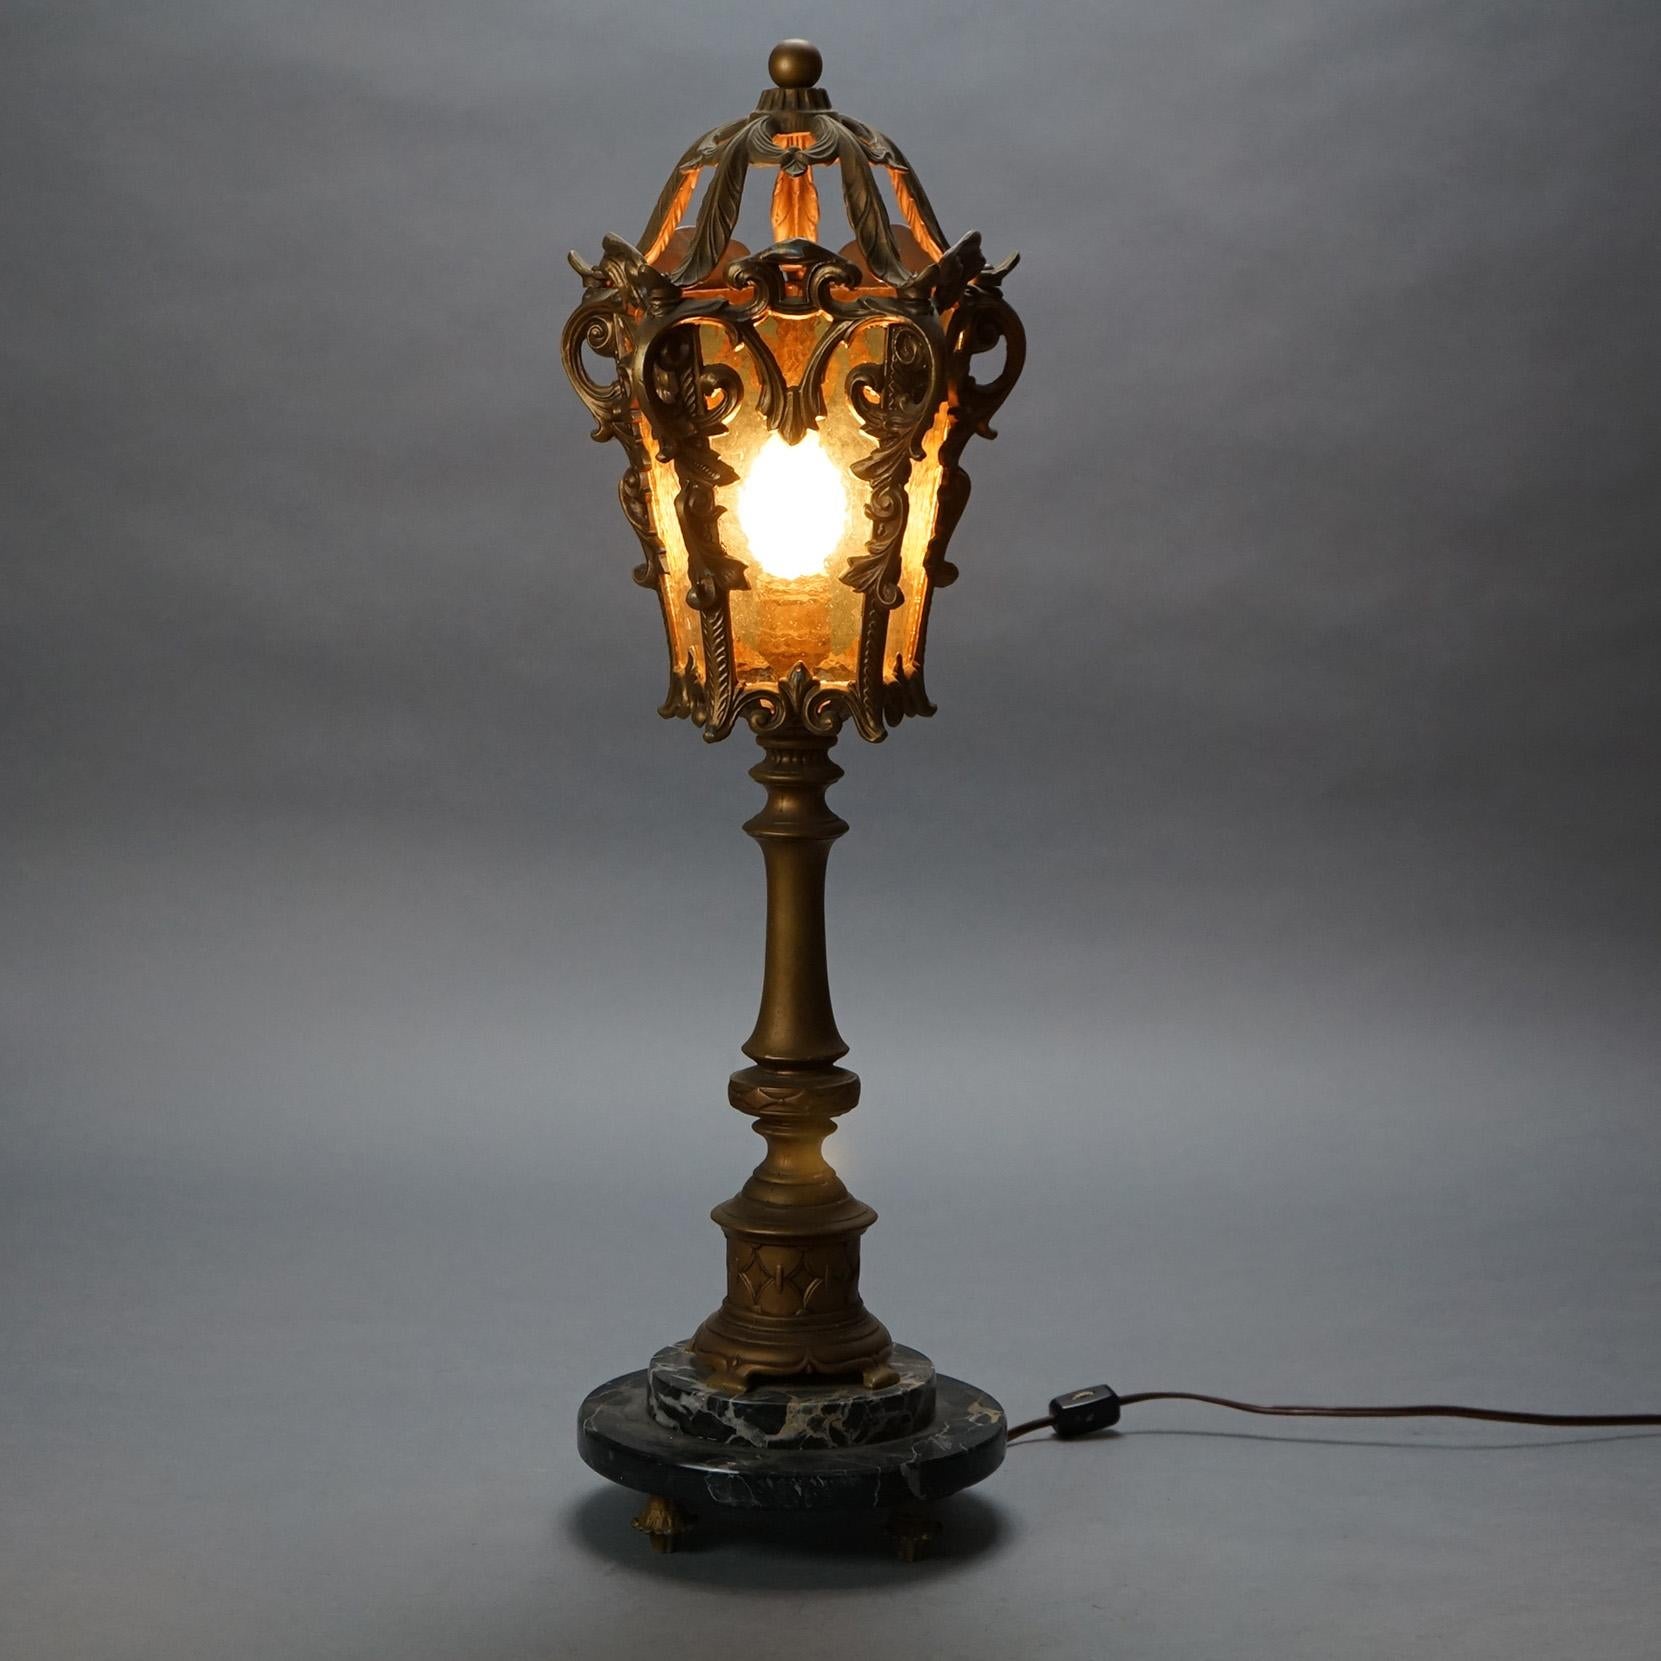 Antique Arts & Crafts Hammered Amber Glass Torchiere Table Lamp c1920 For Sale 1